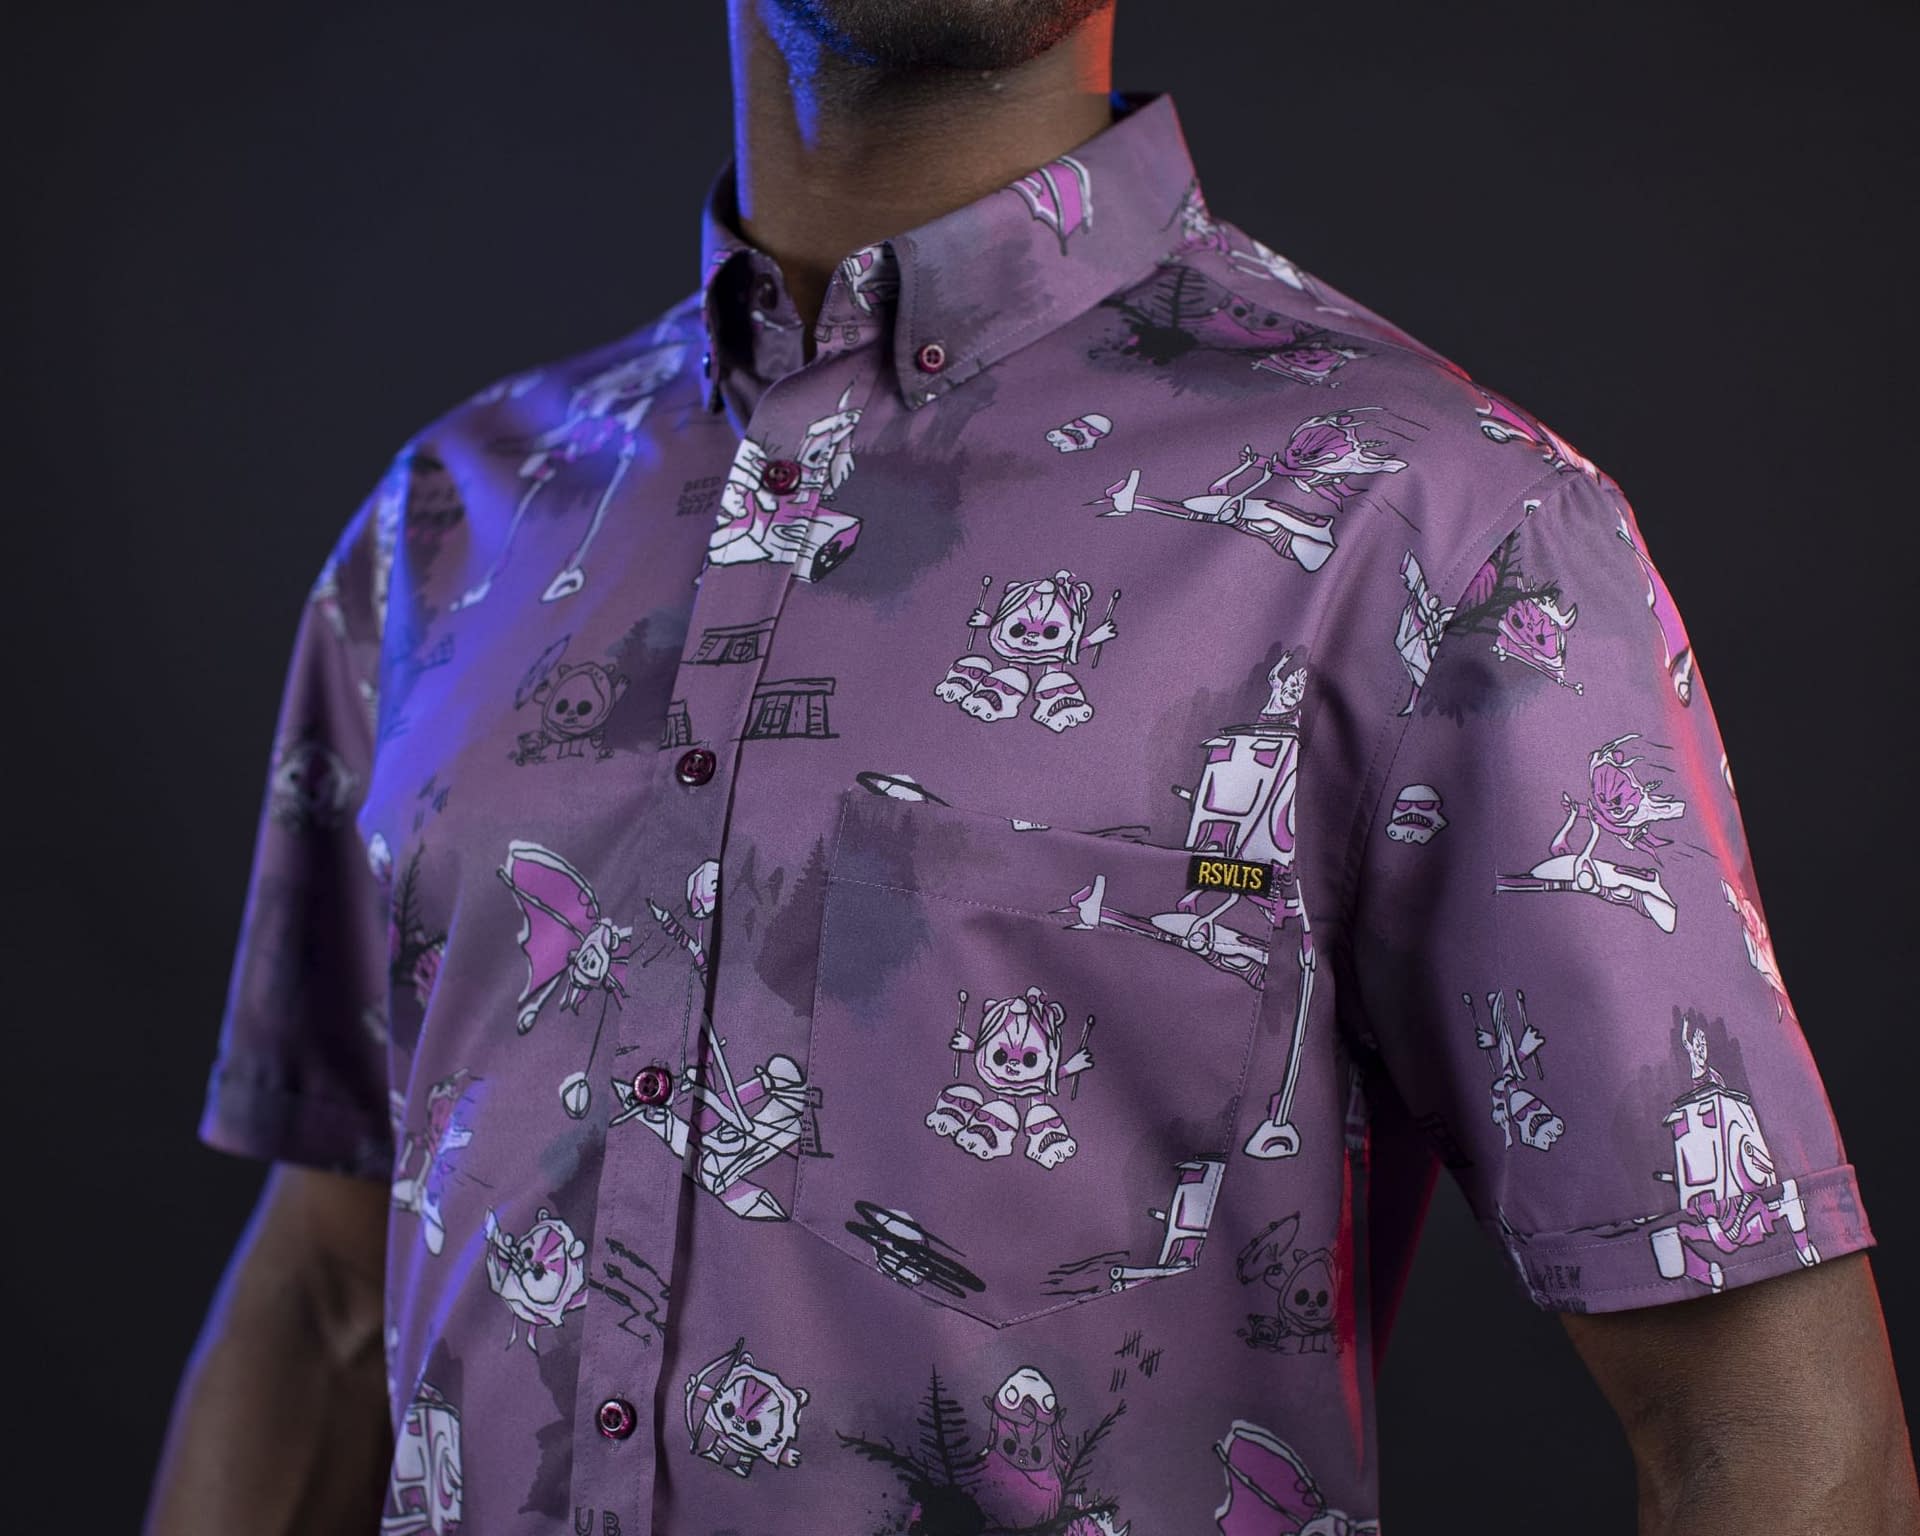 RSVLTS Reveals Exclusive Button-Downs for Star Wars Celebration 2023